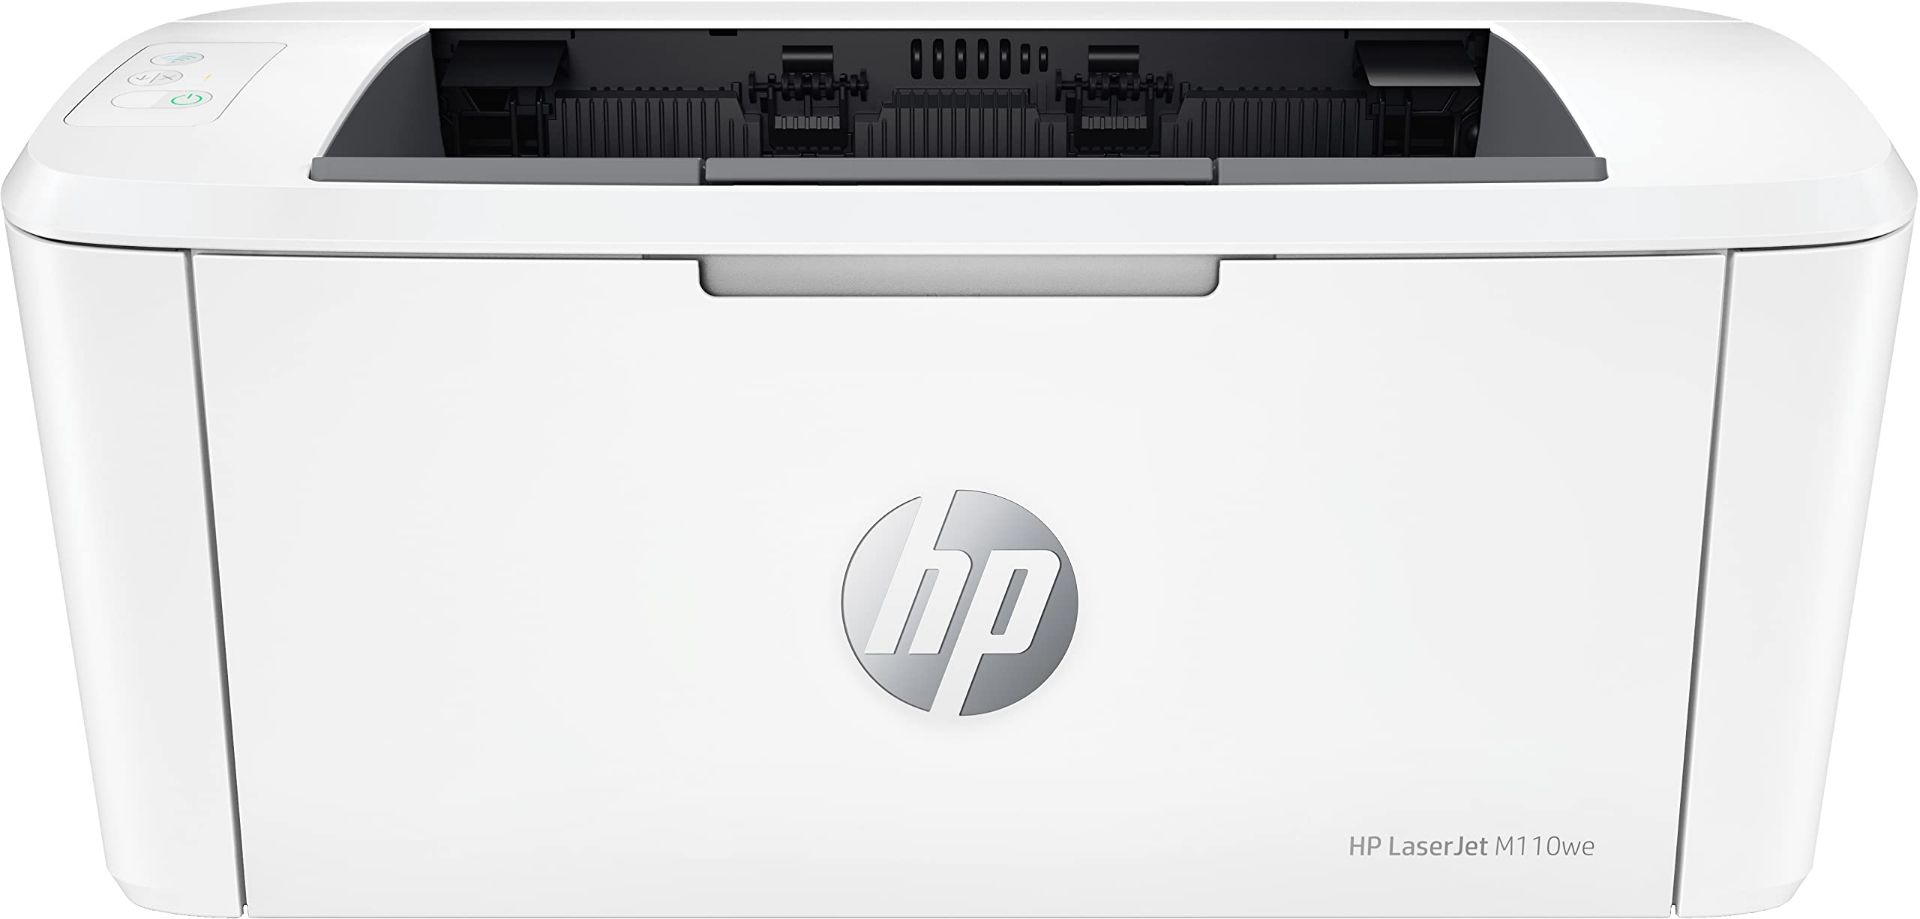 RRP £94.93 HP LaserJet M110we Printer with 6 months of Instant Toner Included with HP +